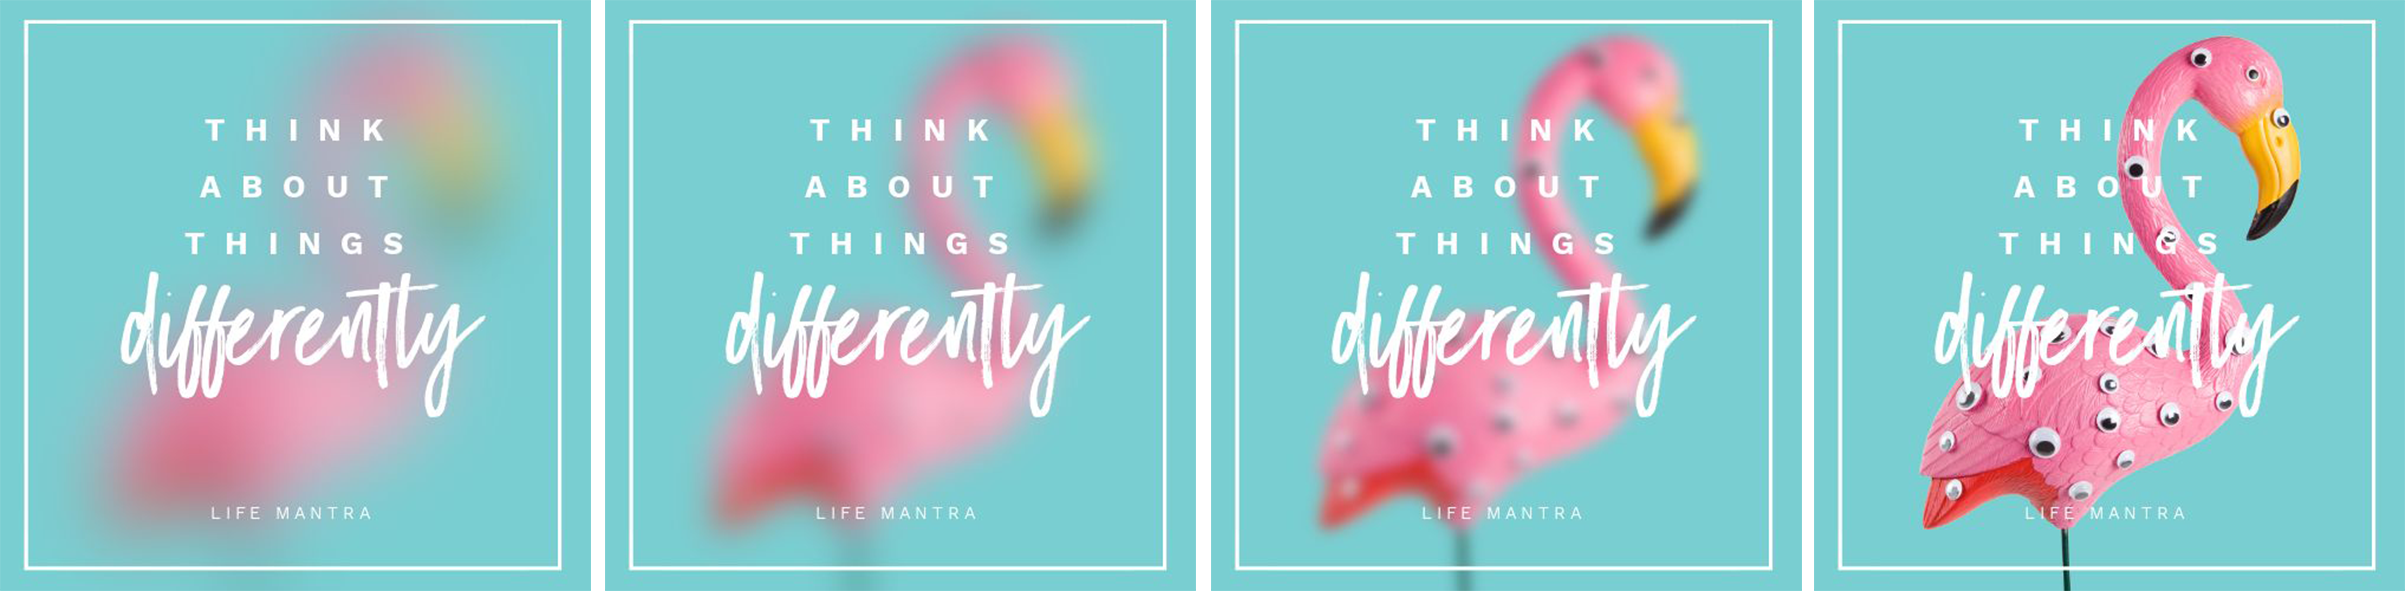 Steps to Creating a GIF using the blur filter effect - Animated GIFs 10 Ways from 1 Template - Hack Your Visual Design Series